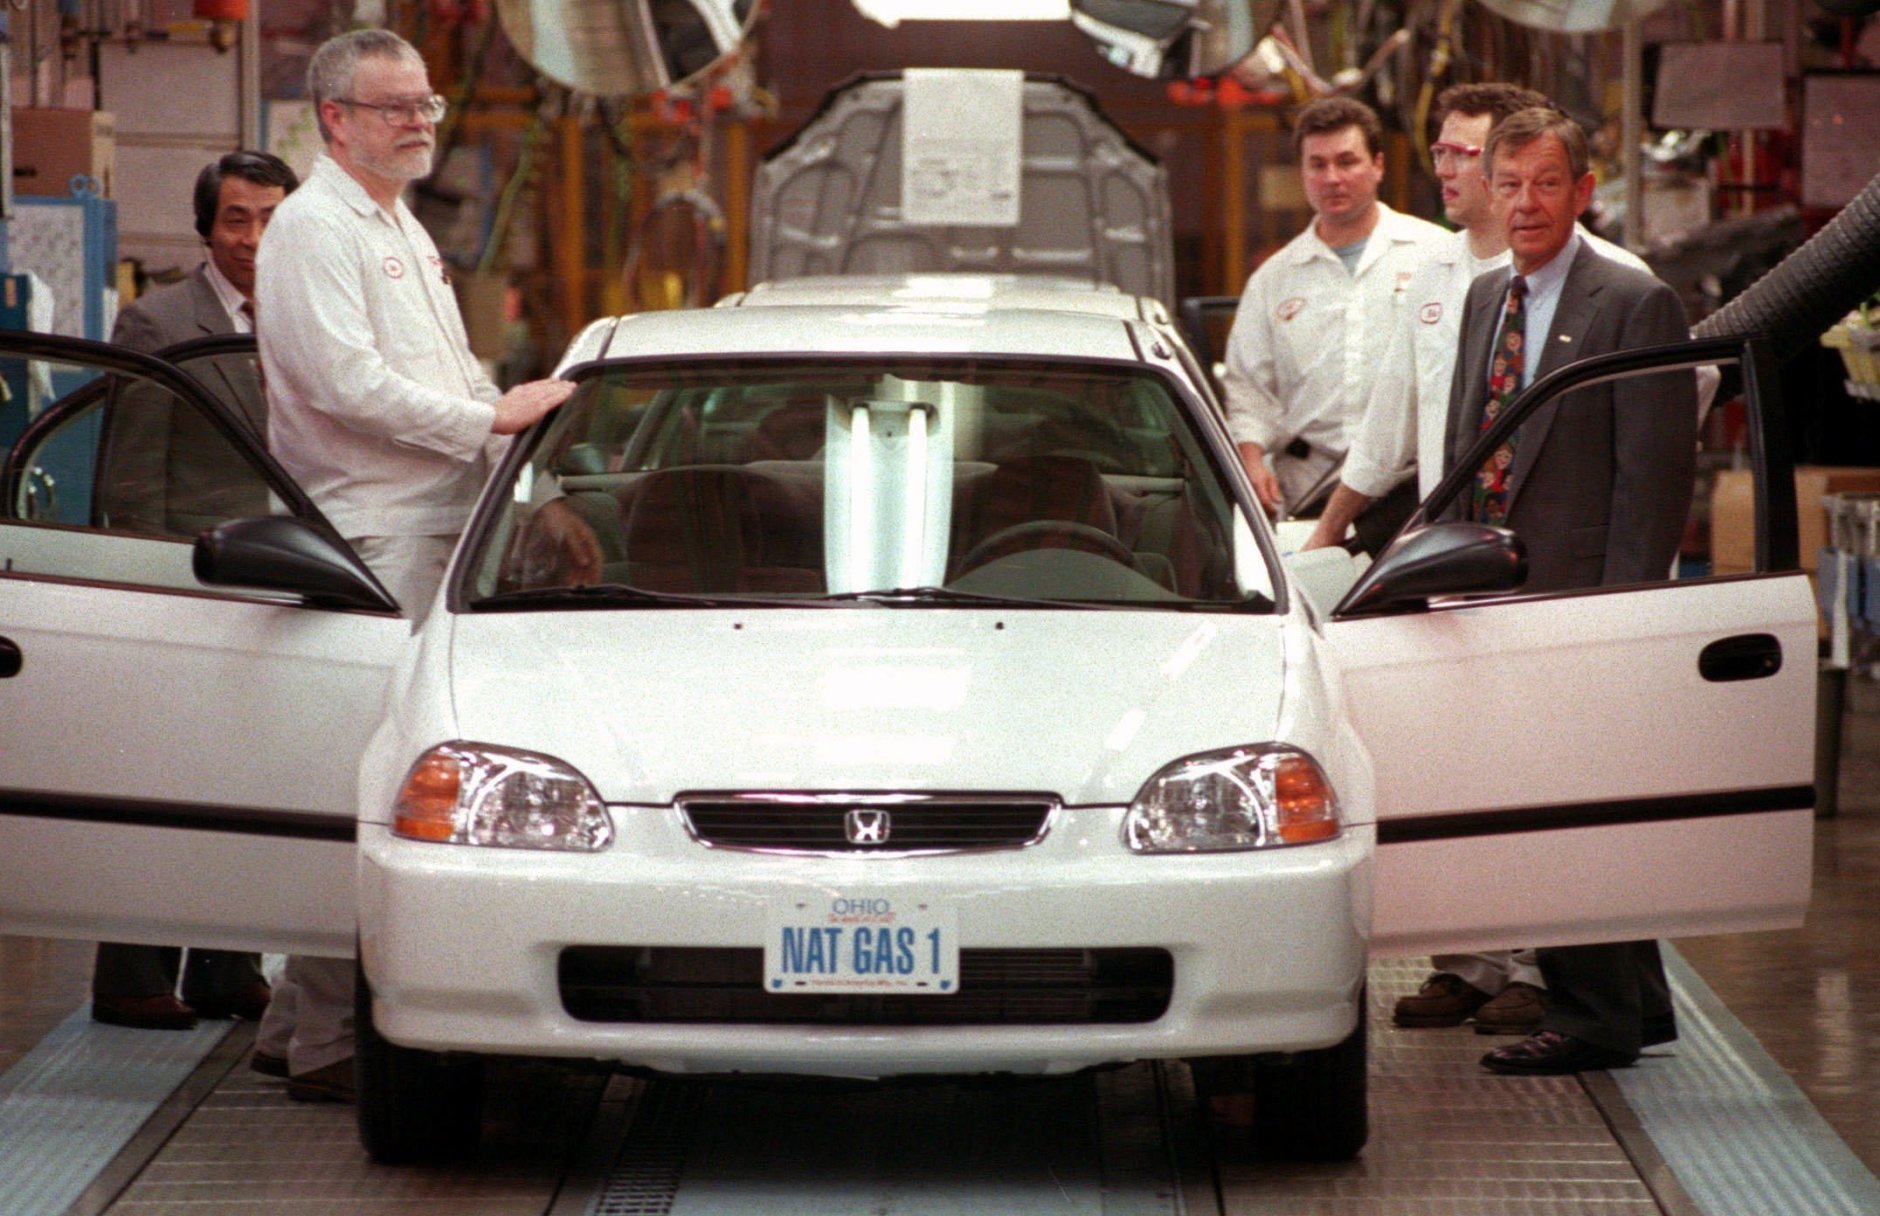 The 1998 Honda Civic is the most stolen car overall. Ohio Gov. George Voinovich, right, gets ready to step into a new natural-gas-powered Honda Civic GX in East Liberty, Ohio, Wednesday, April 8, 1998. Voinovich was invited to drive the first of the new cars off the line during a ceremony marking its entry into the North American market. The tailpipe carbon dioxide emissions of the Civic GX are 20 percent less than a gasoline-powered car, and other toxic emissions have been slashed to almost zero, the company said. (AP Photo/Chris Kasson)